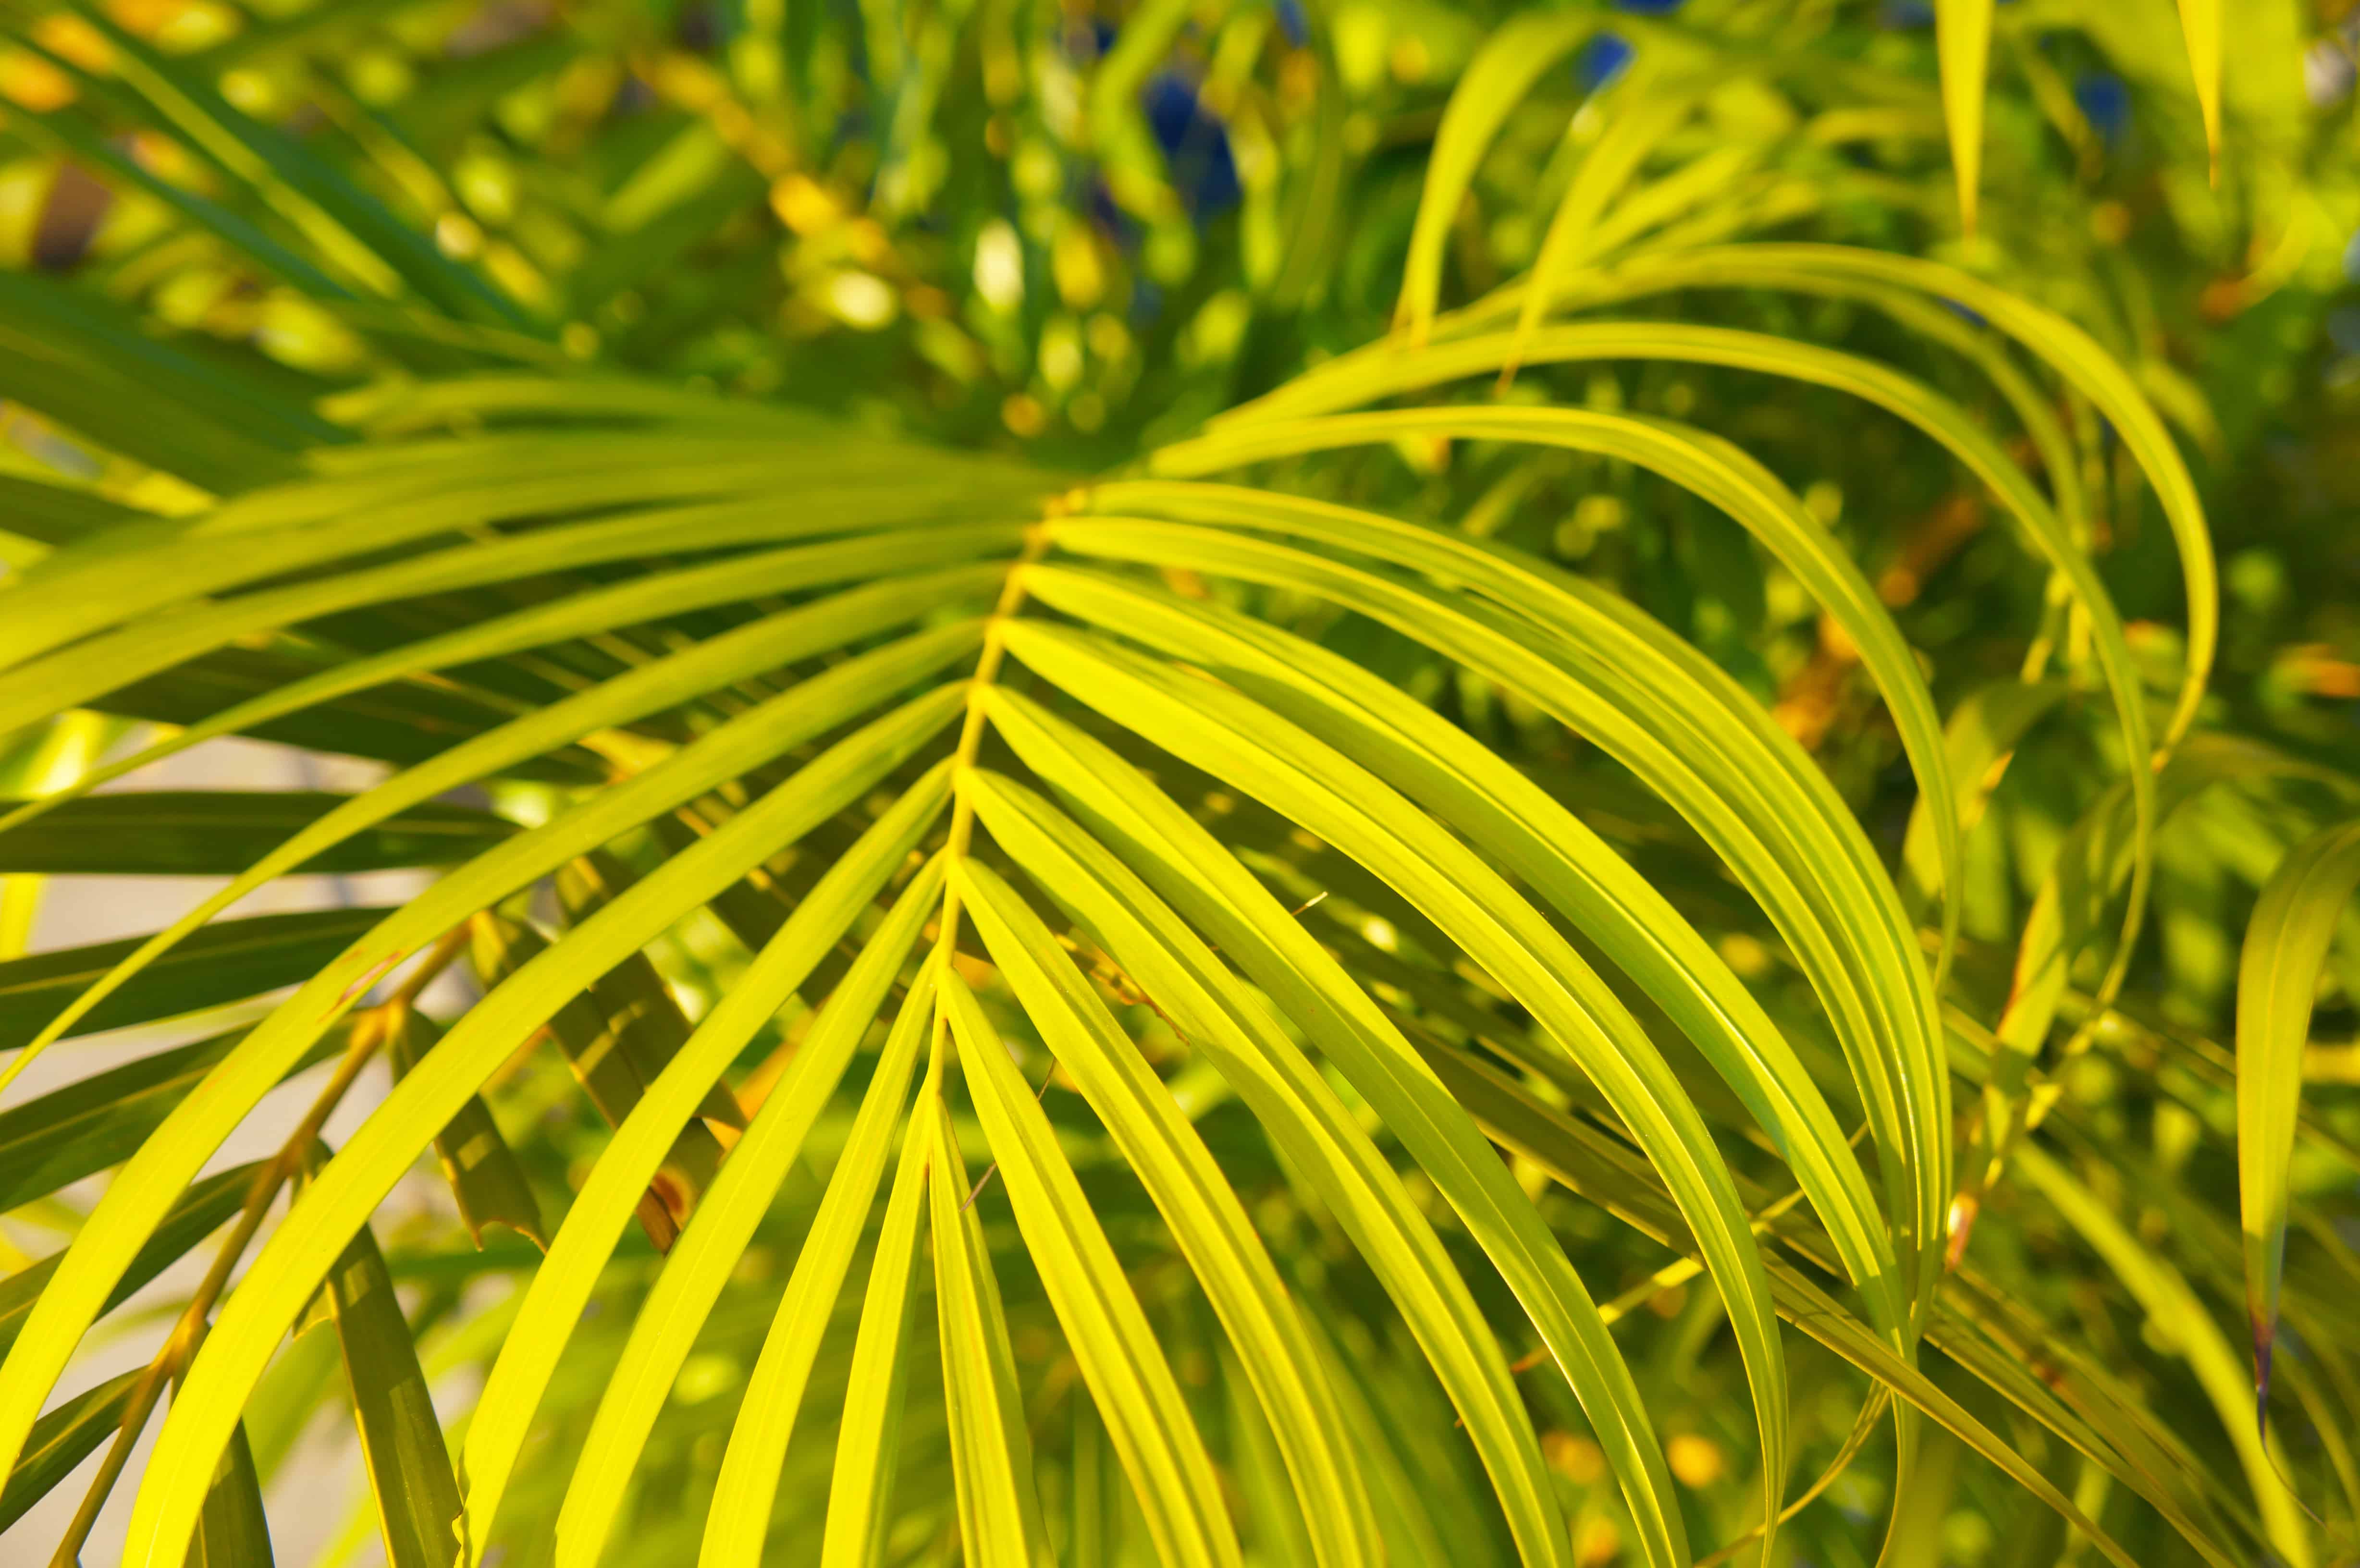 A closeup of the leaves and fronds of Chamaedorea seifrizii or the bamboo palm plant.